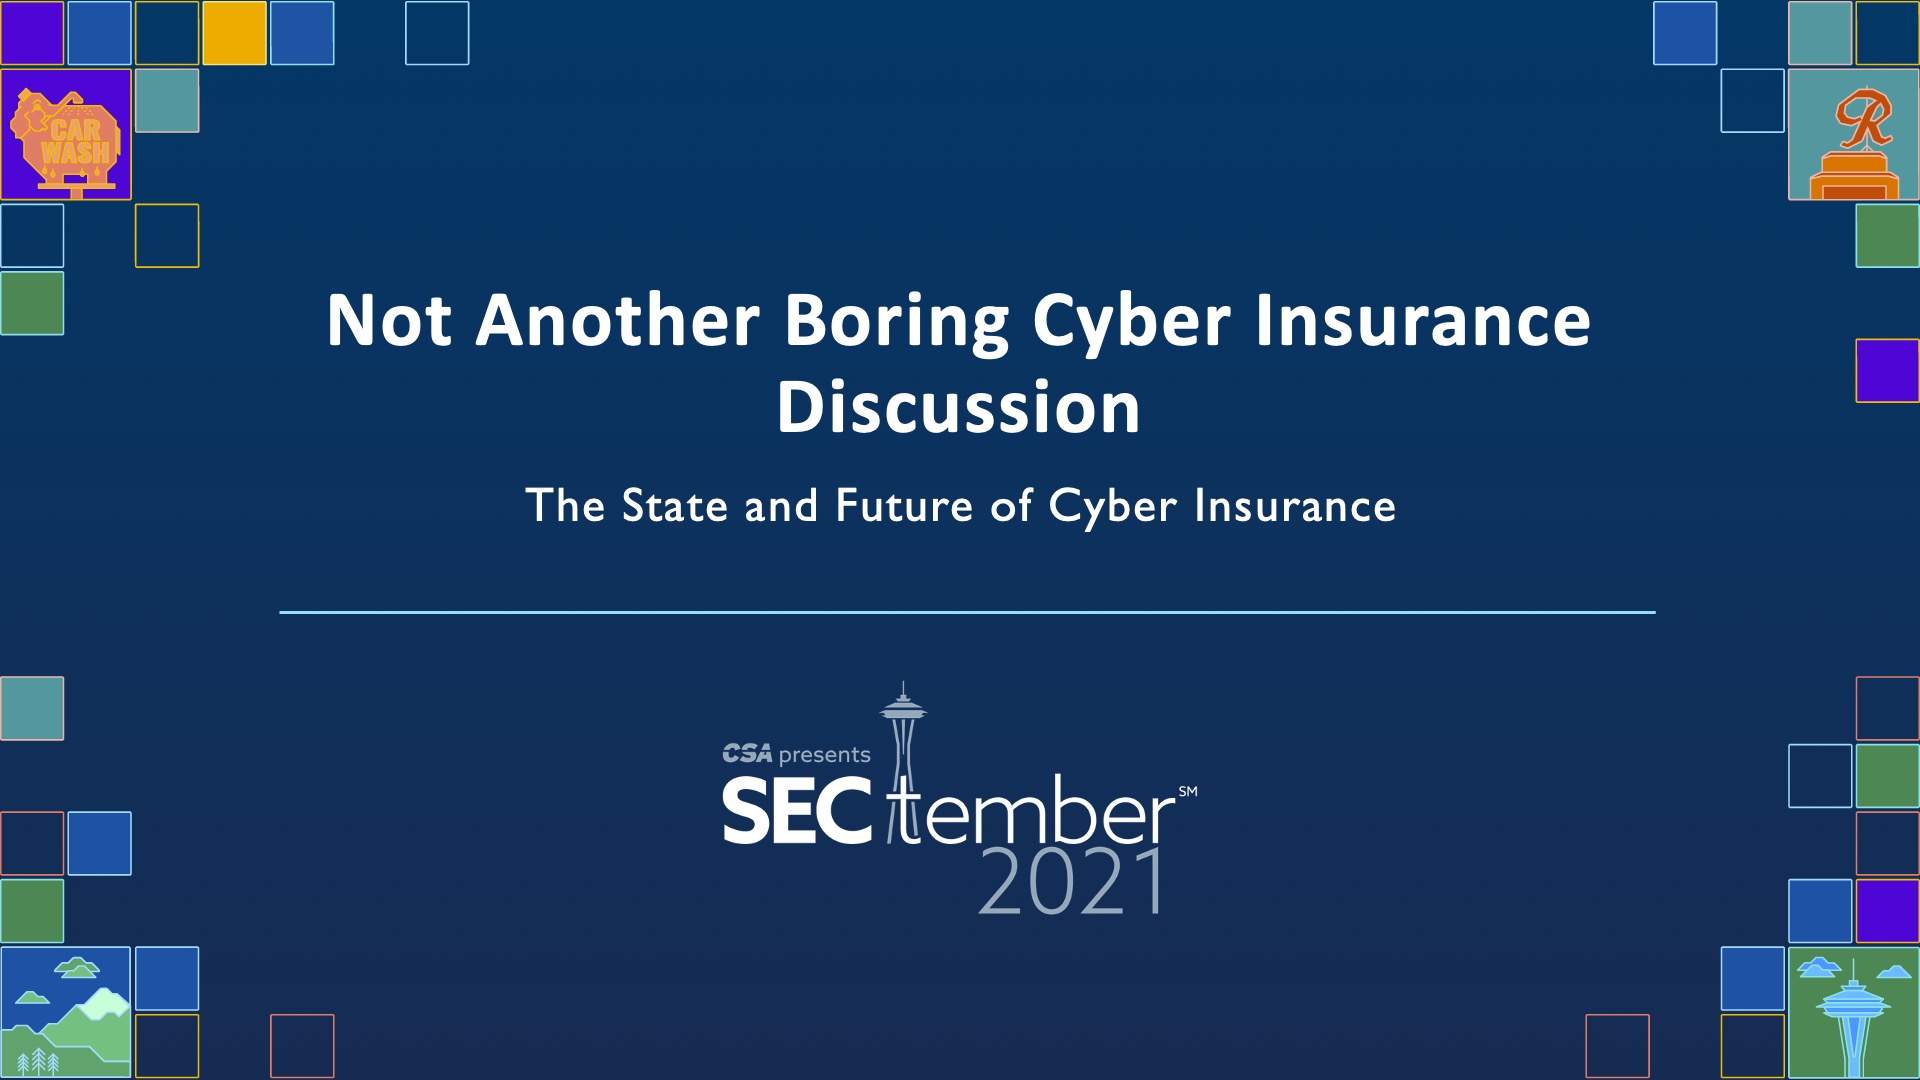 Not Another Boring Cyber Insurance Discussion - The State and Future of Cyber Insurance